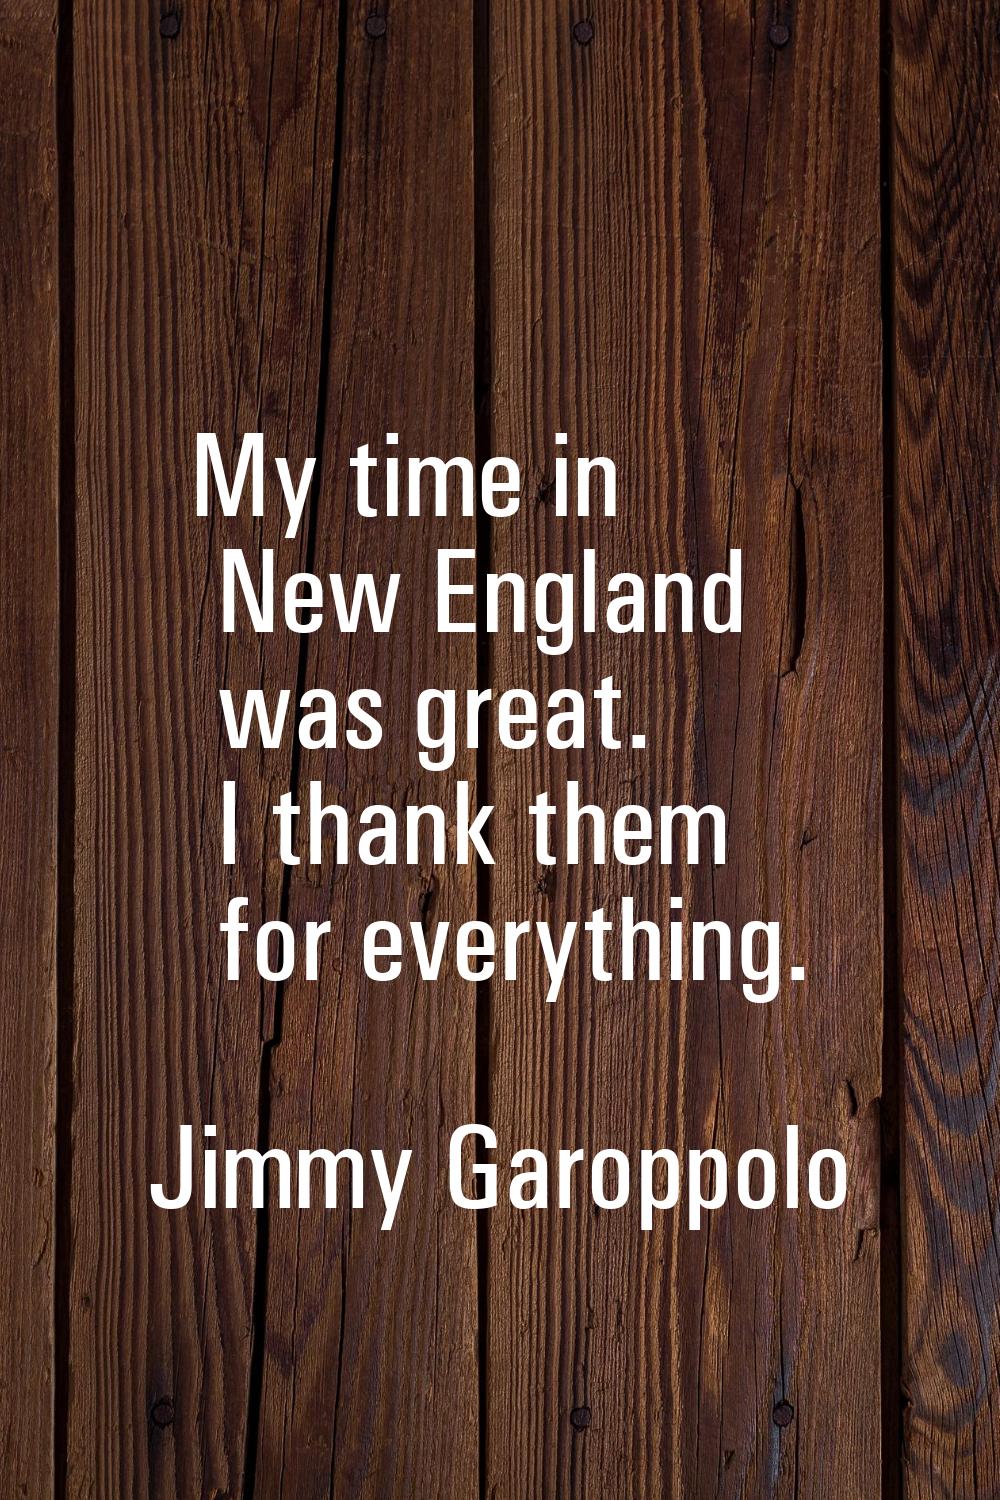 My time in New England was great. I thank them for everything.